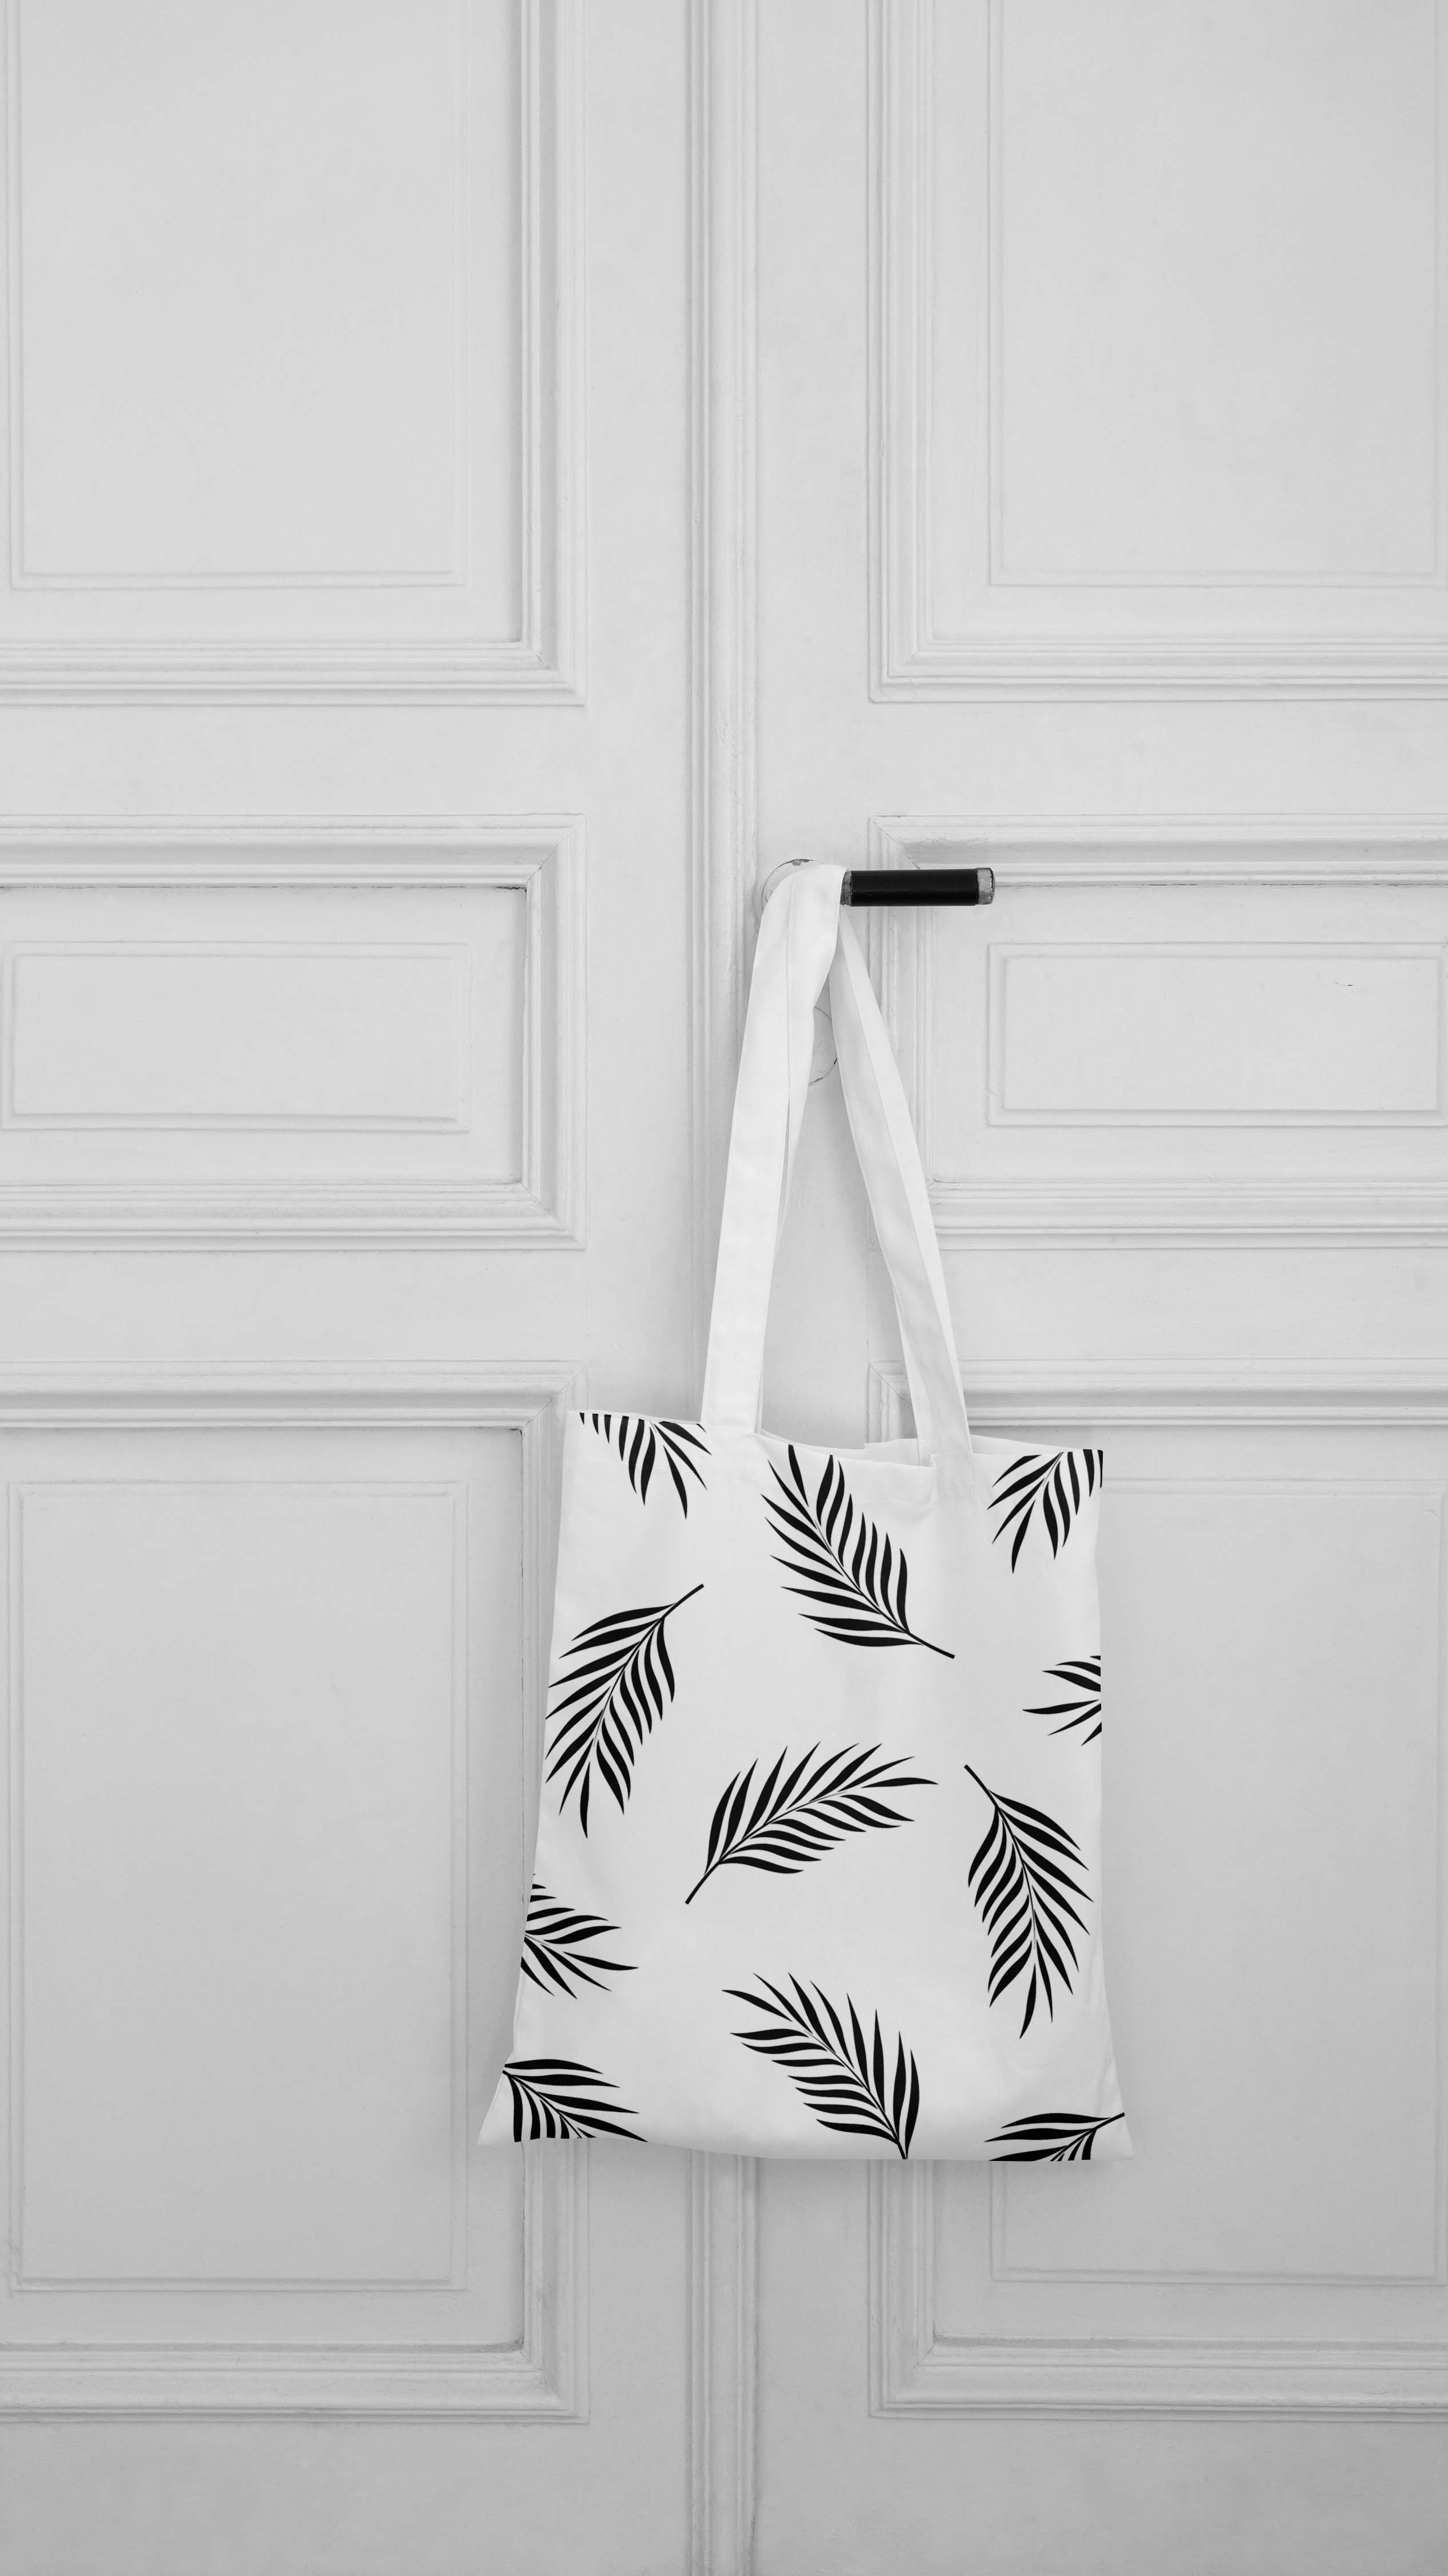 Black and white photo of a tote bag hanging on a door.